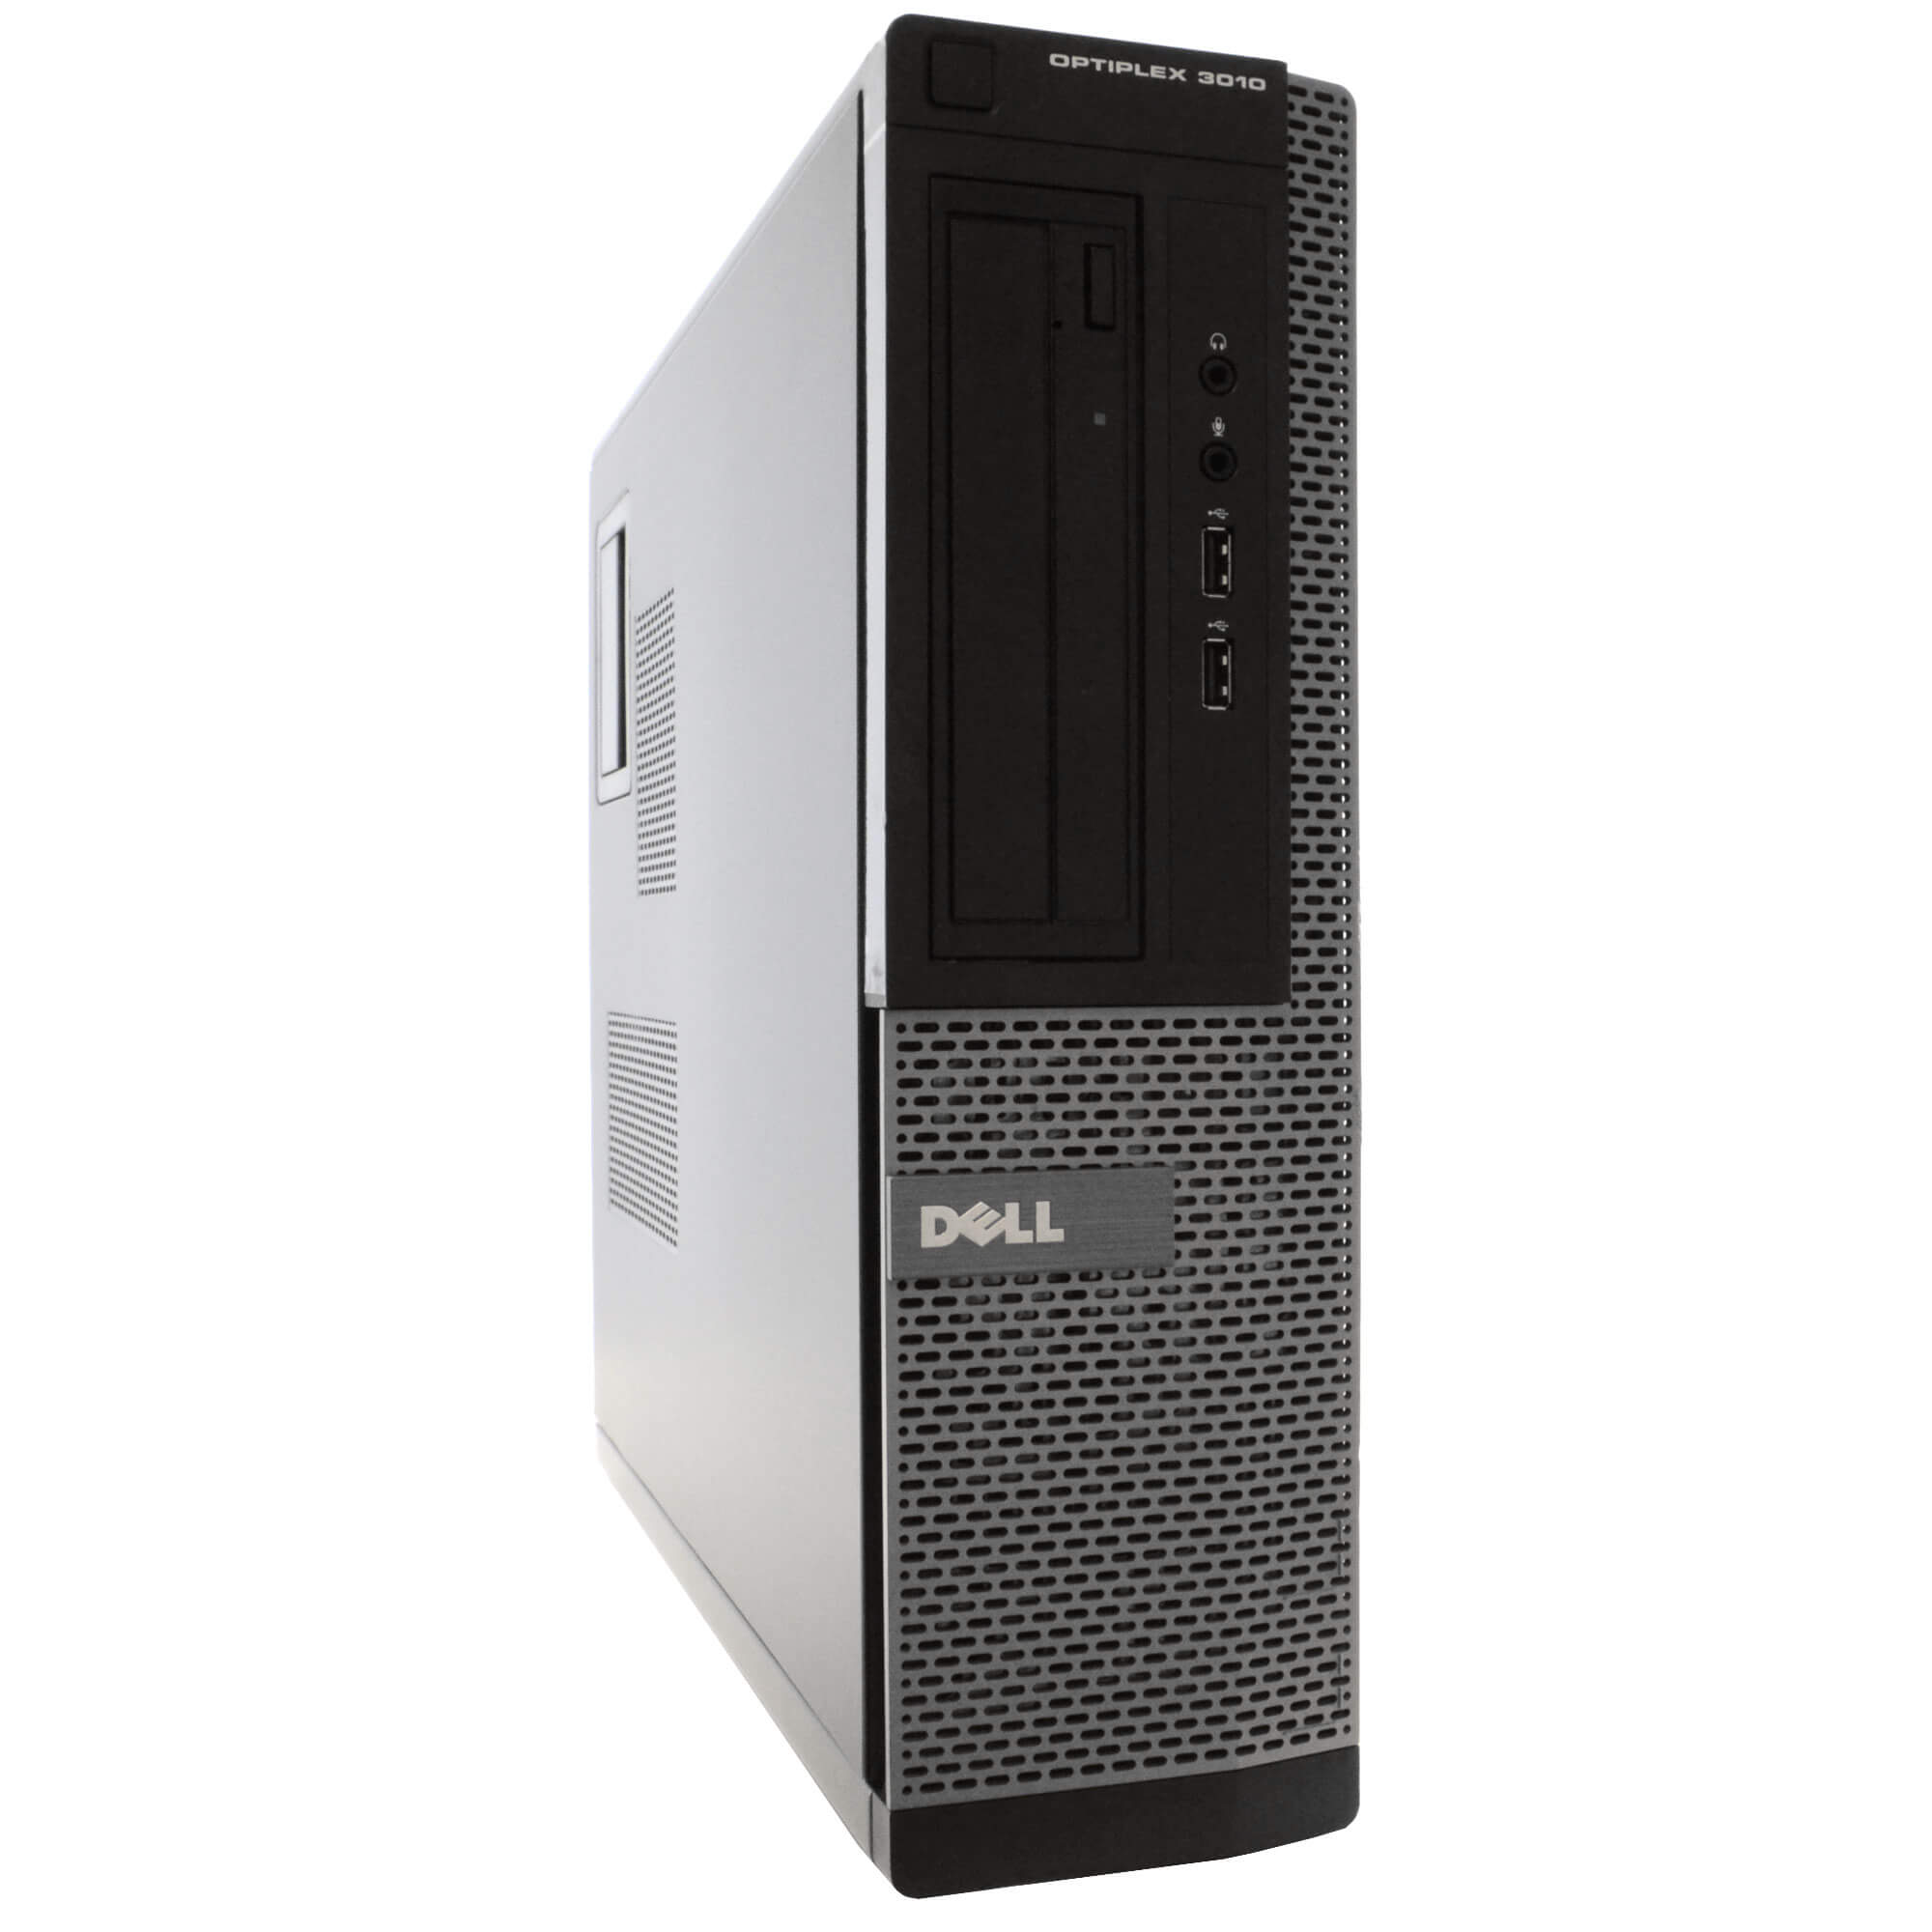 DELL Optiplex 3010 Desktop Computer PC, Intel Quad-Core i5, 500GB HDD, 4GB DDR3 RAM, Windows 10 Home, DVD, WIFI, 19in Monitor, USB Keyboard and Mouse (Used - Like New) - image 4 of 9